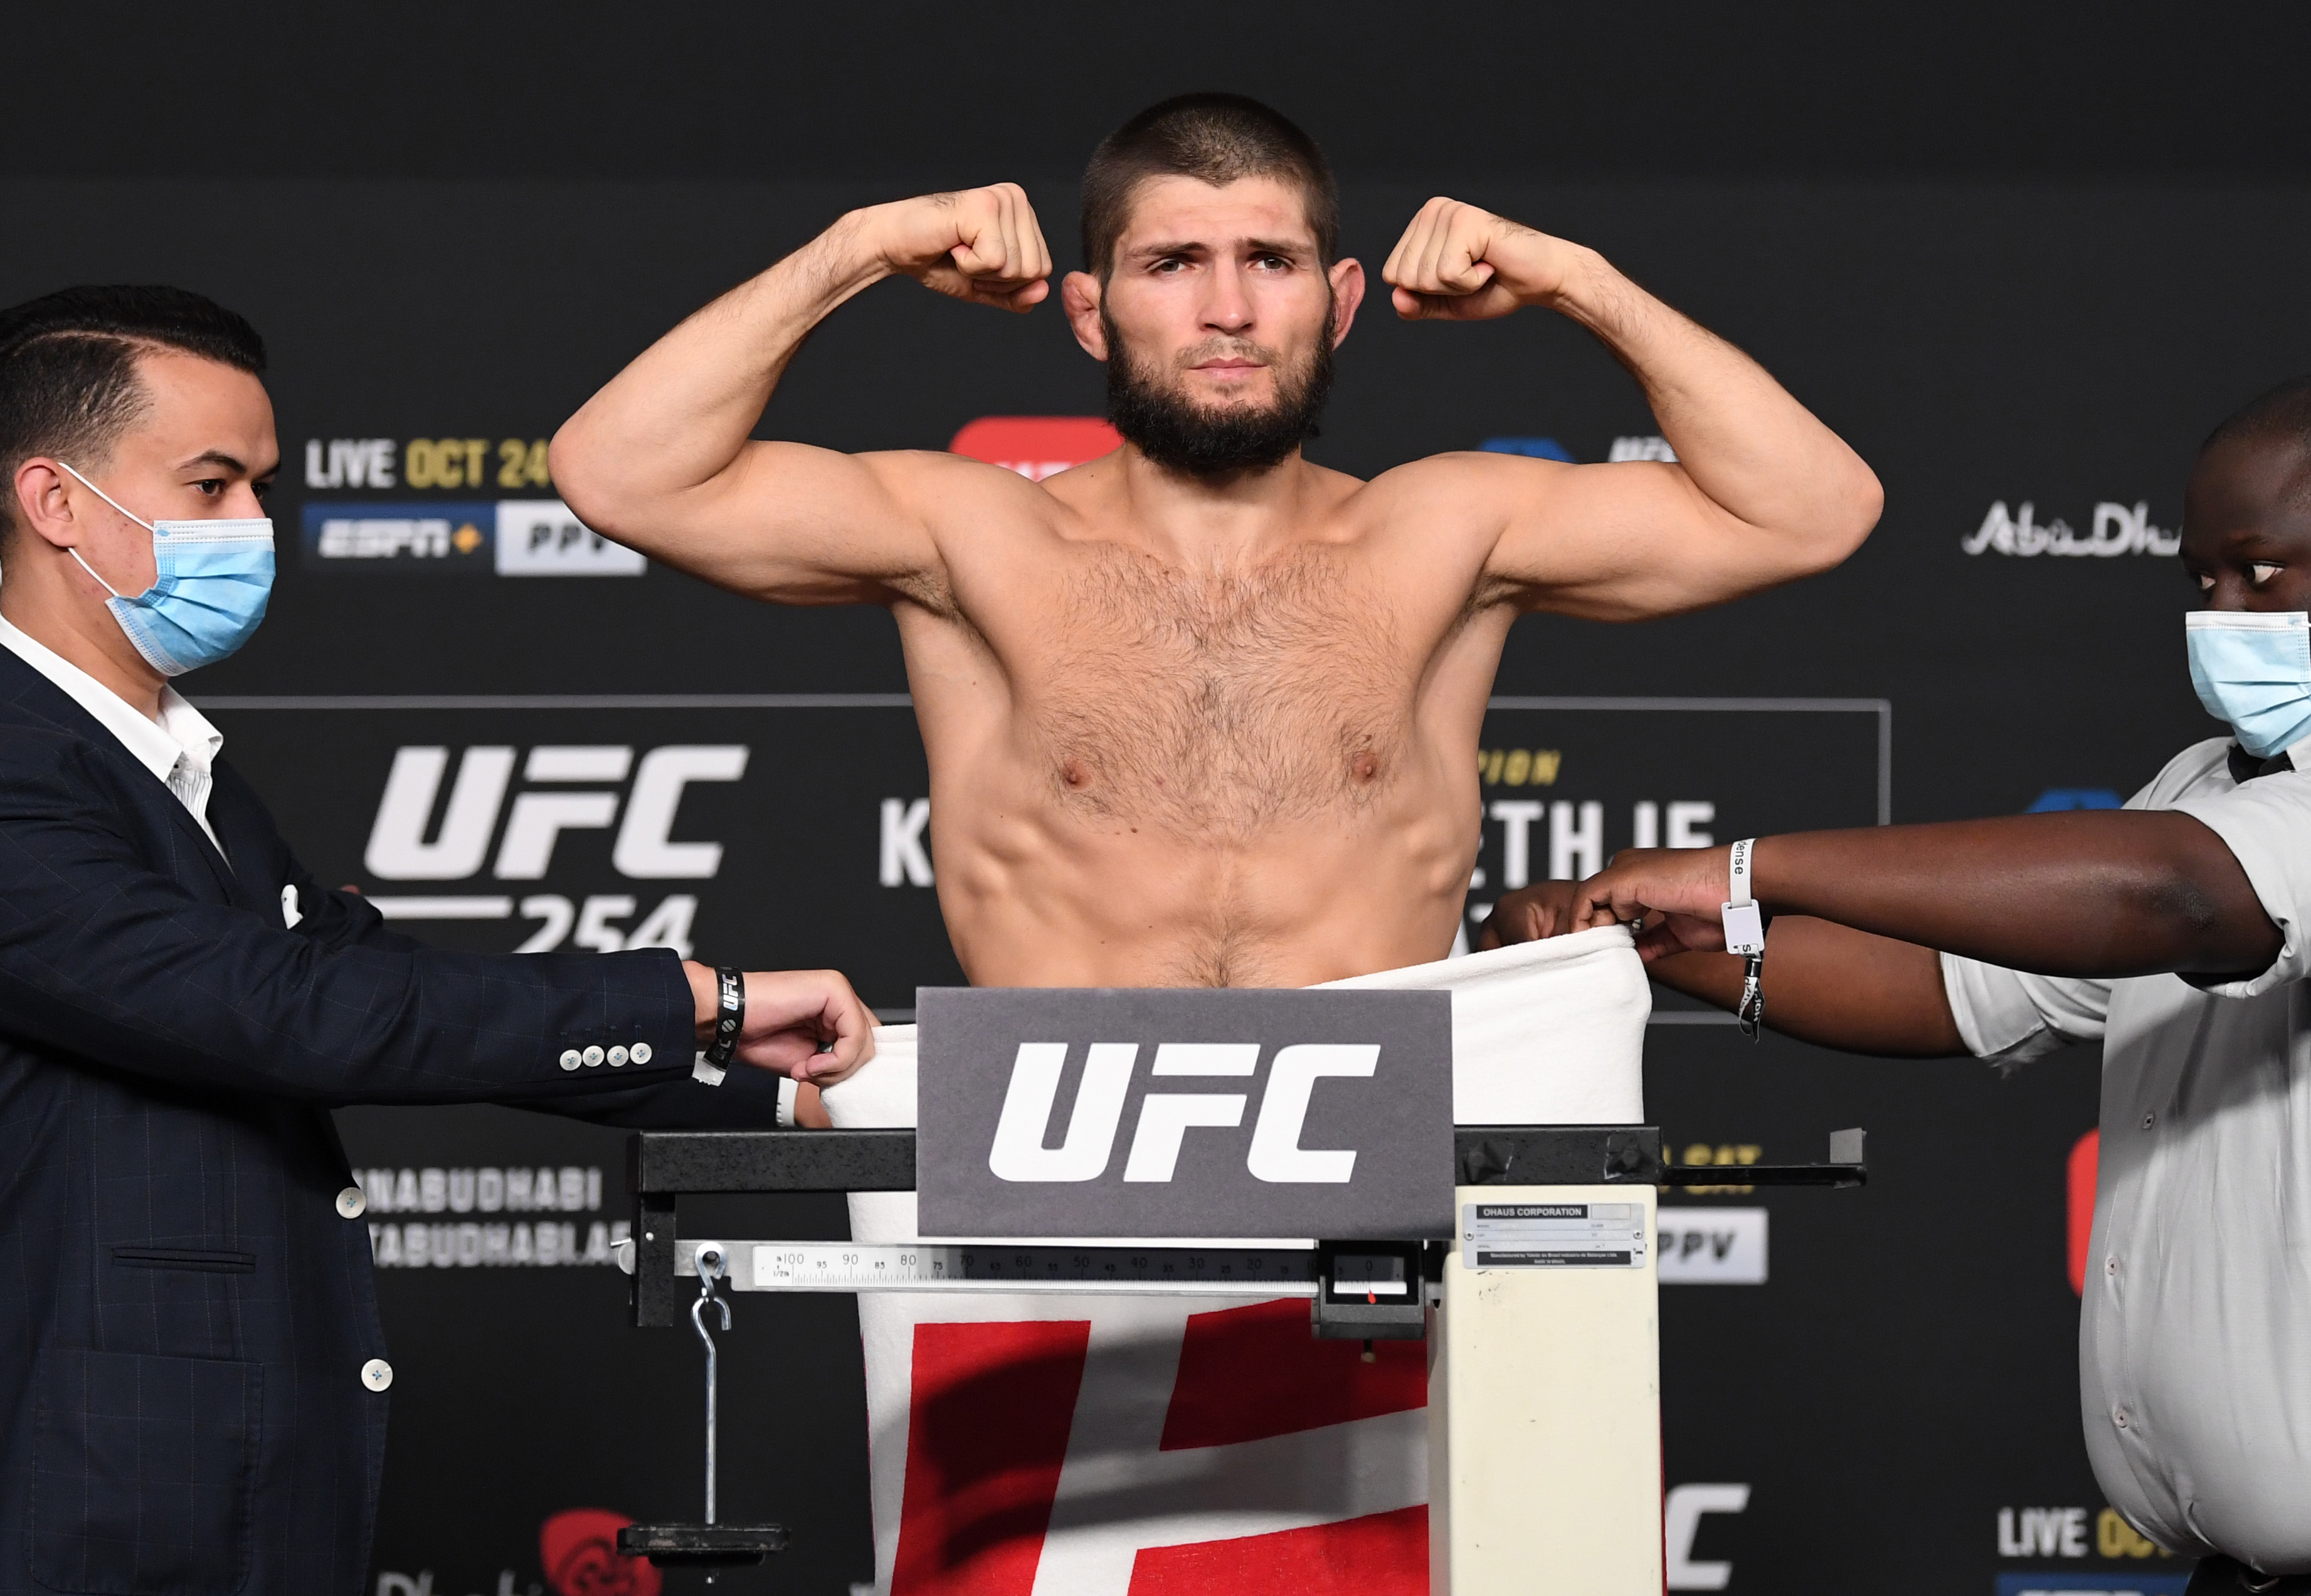 Khabib Nurmagomedov and Uriah Hall’s ‘Traumatic’ Seizures May Reveal Dangers of Cutting Weight in the UFC